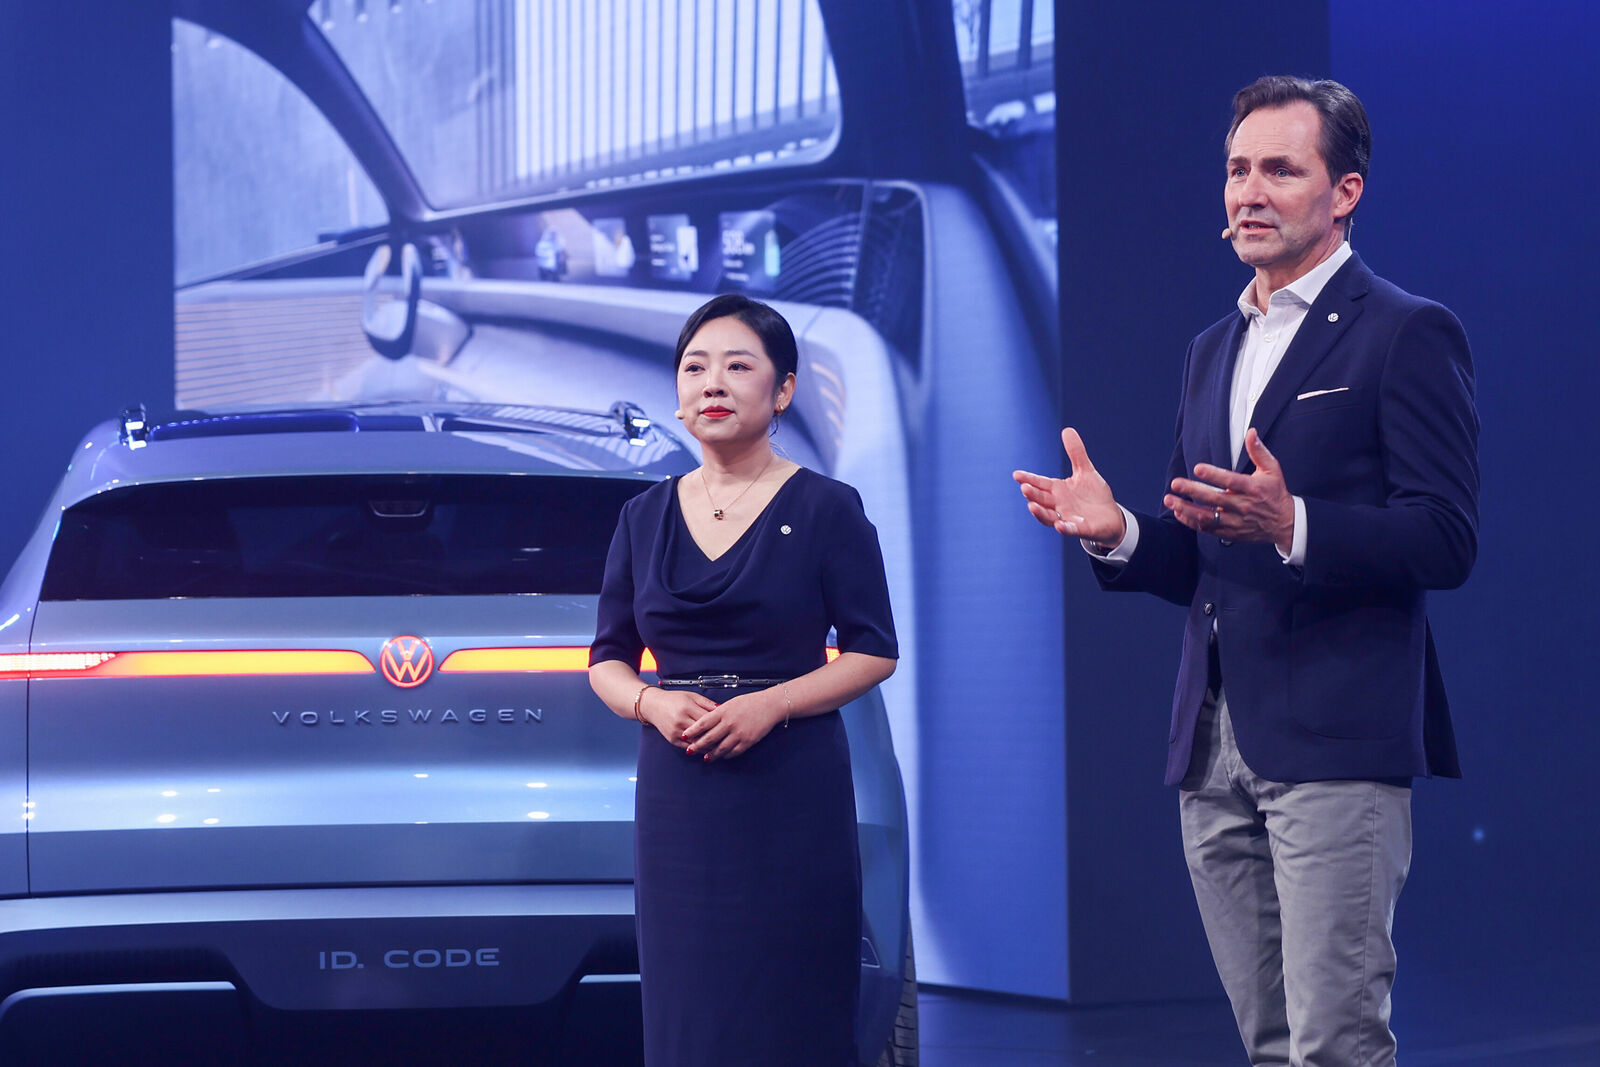 Two presenters, a woman and a man, stand confidently on stage in front of a metallic blue Volkswagen ID. Code concept SUV. They are delivering a presentation about the vehicle, gesturing and speaking to the audience.